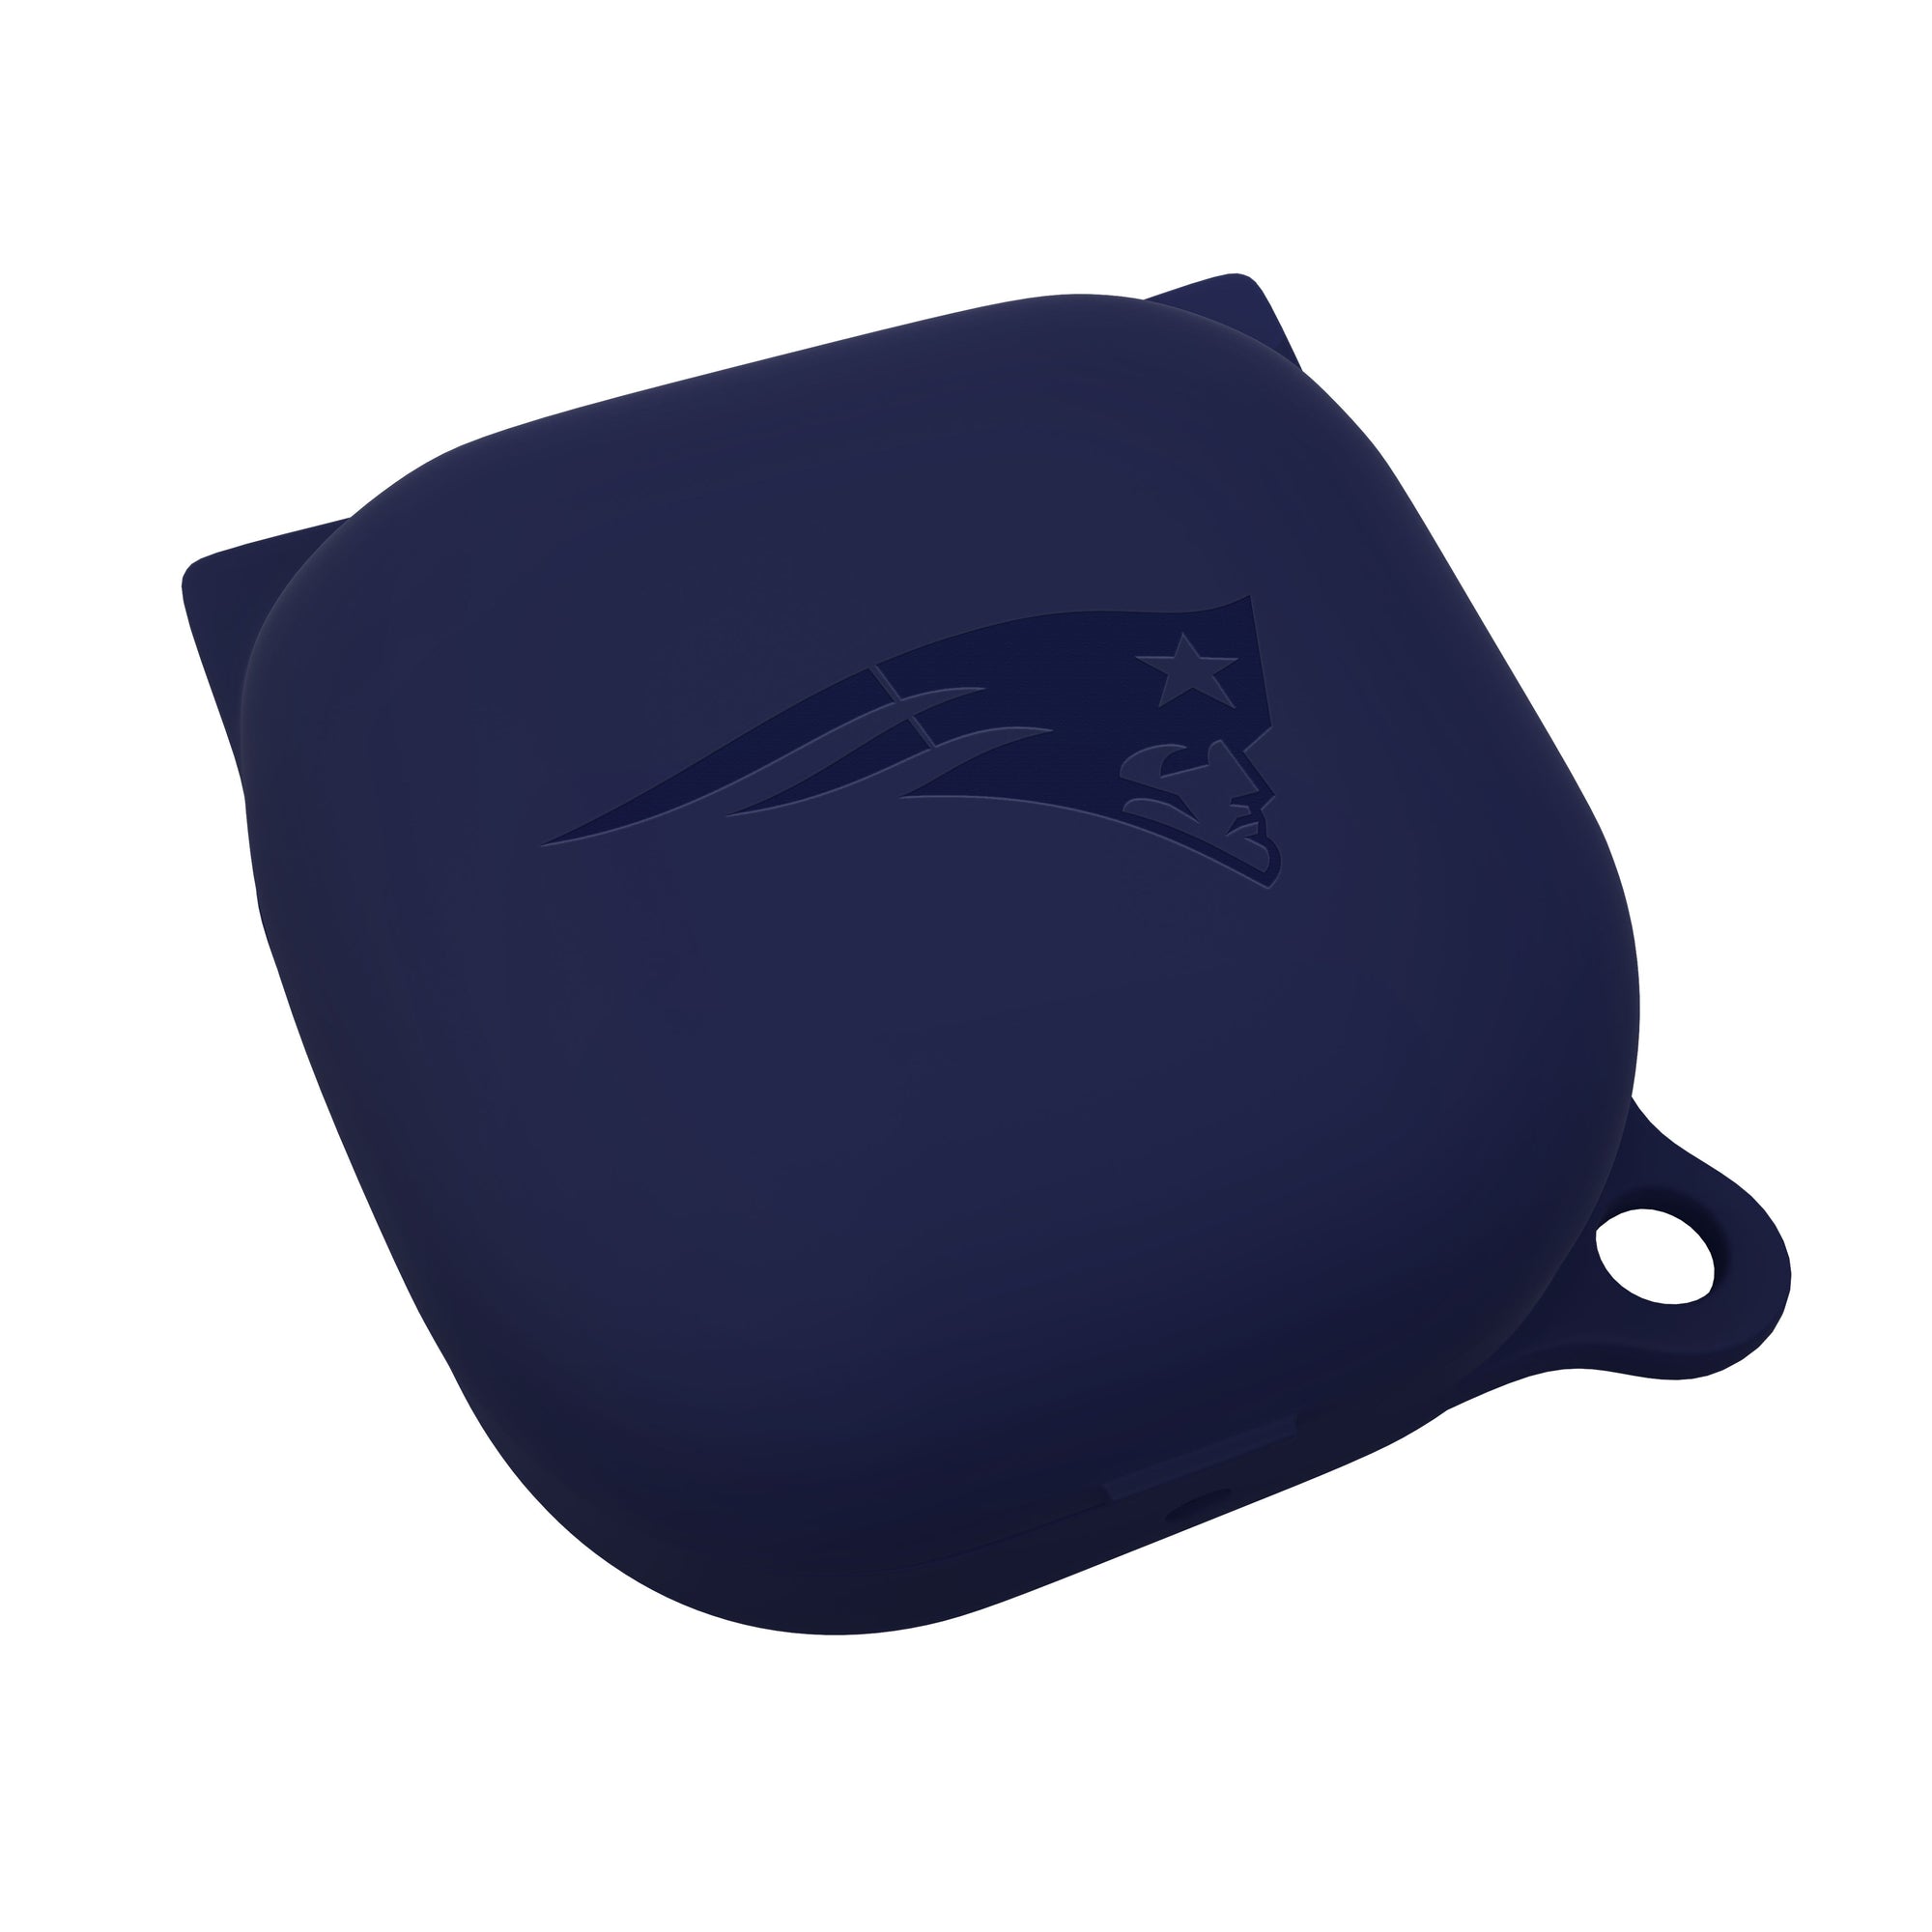 New England Patriots Engraved Samsung Buds Pro Case Cover